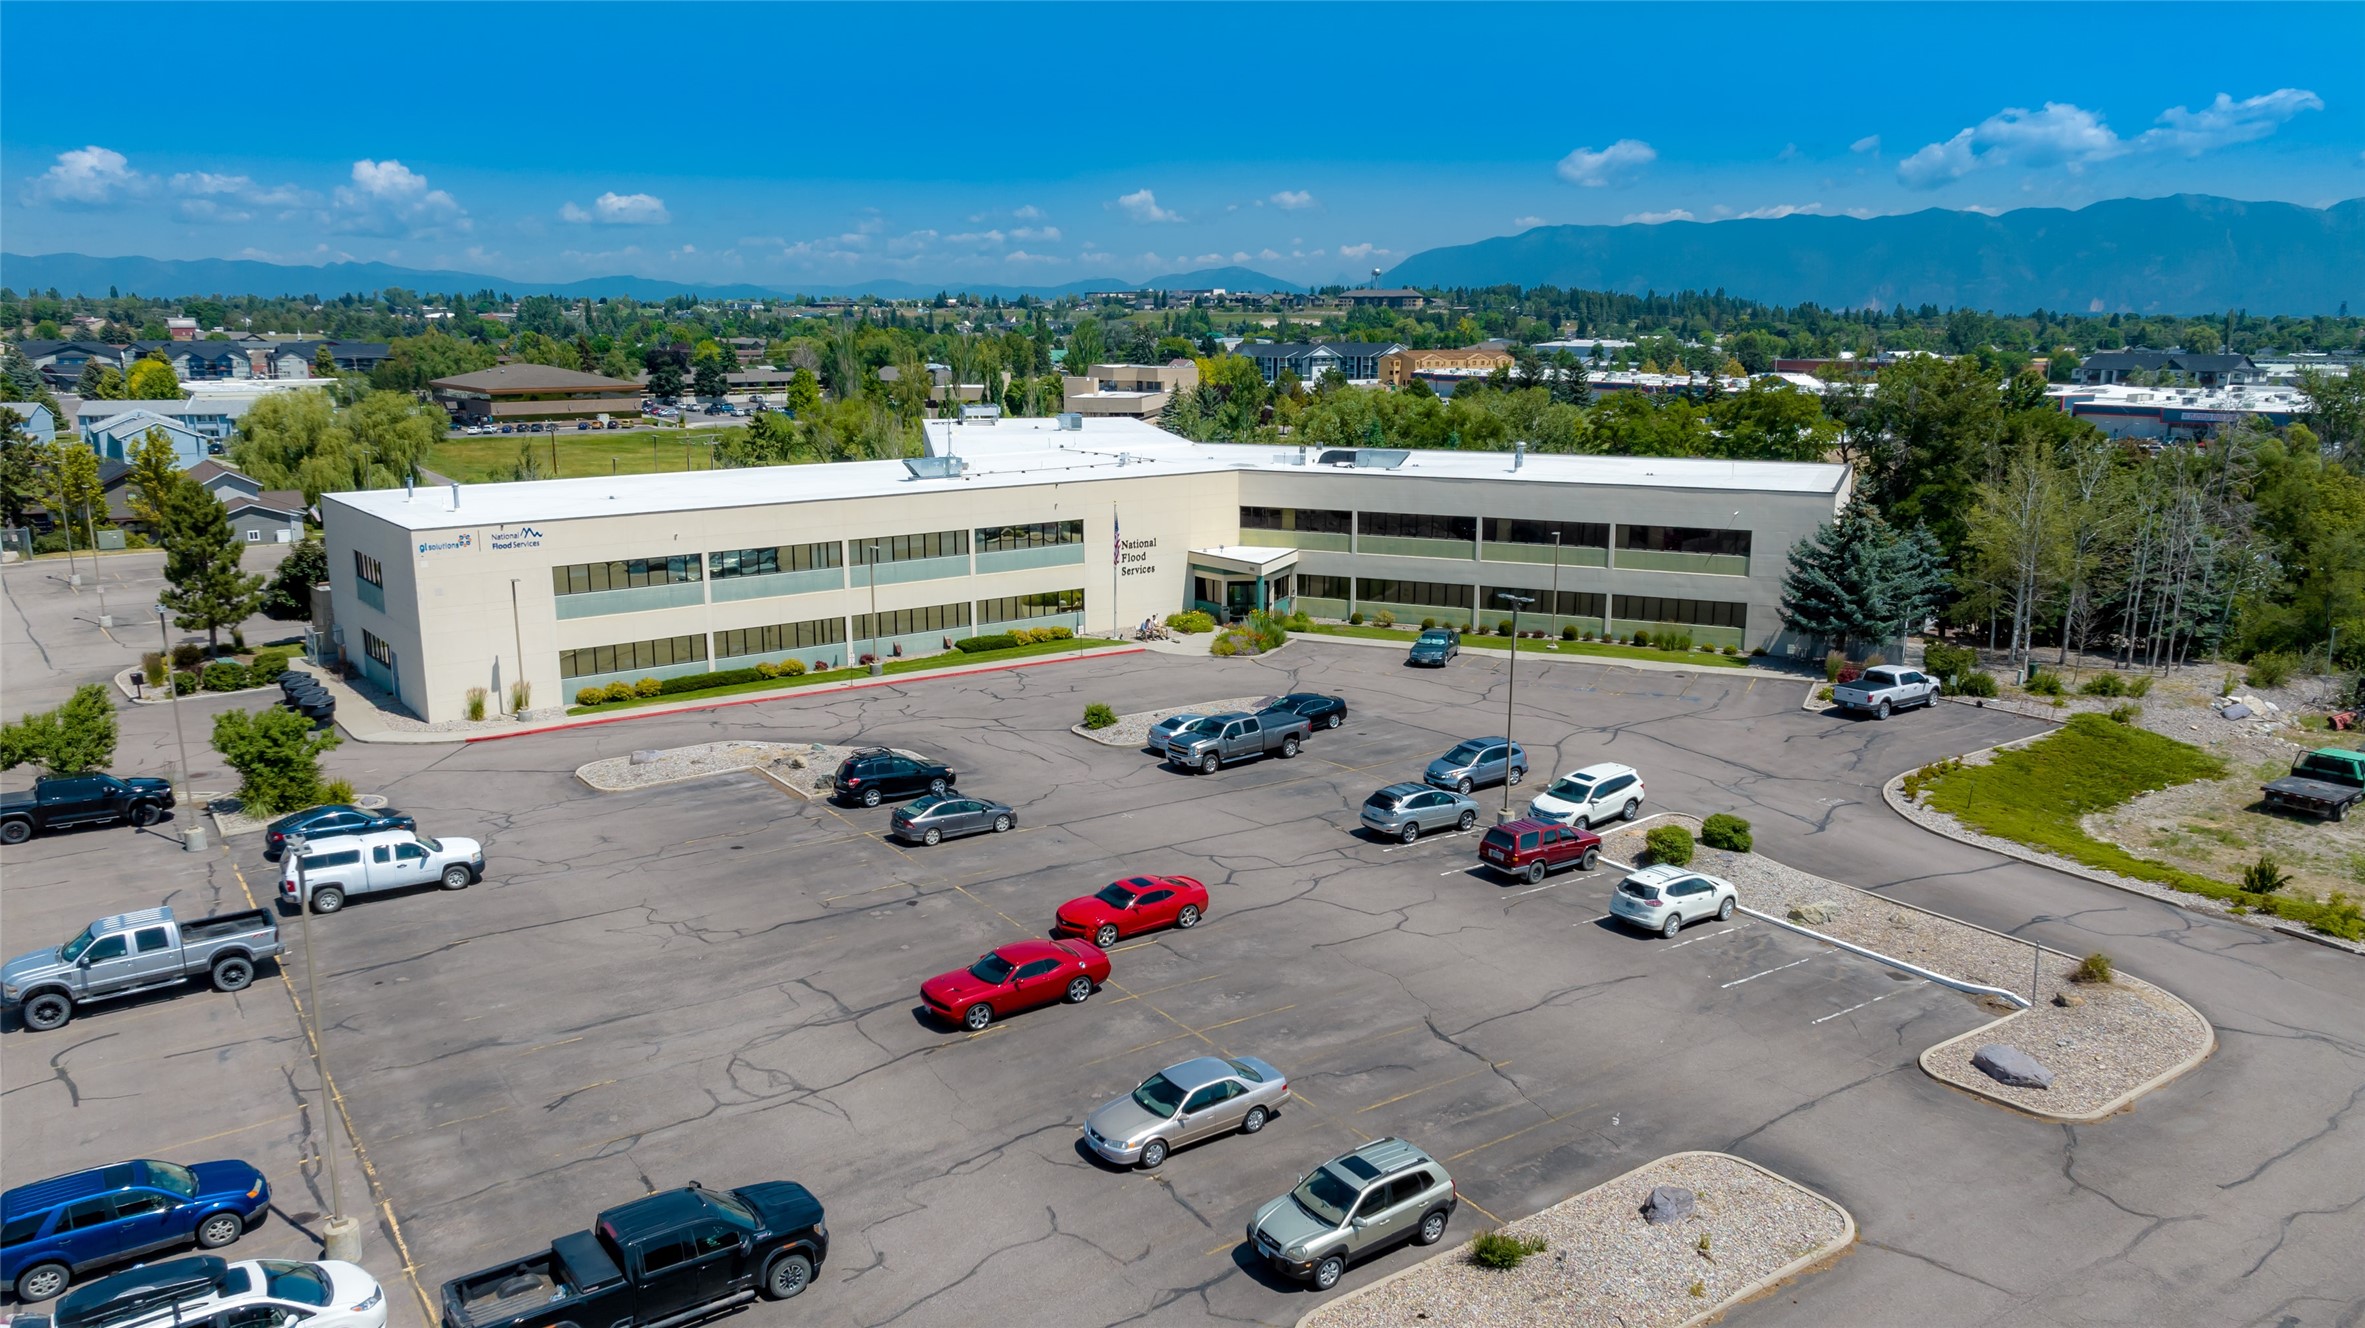 If you’re in the market for high-grade professional office space — of any size — check out the opportunities at this highly functional, secure and flexible office building just west of the Kalispell city center. Conveniently located close to US Highway 2 and the US Highway 93 bypass, this building offers easy access, abundant parking, screaming-fast fiber optic data lines, a shared common area/lunch room, and the opportunities for multiple office configurations. Furnishings include dividers, desks, chairs, conference room tables, etc… all at no additional cost. You need to see this facility to believe it. Whether you need a couple 200sf offices or the entire 22,000+ space — or anything in between — we have a home for you. Space available at $11/sf/year base lease + $3/sf/year CAMs.  Call David Stone at 406-250-7249, or your real estate professional.